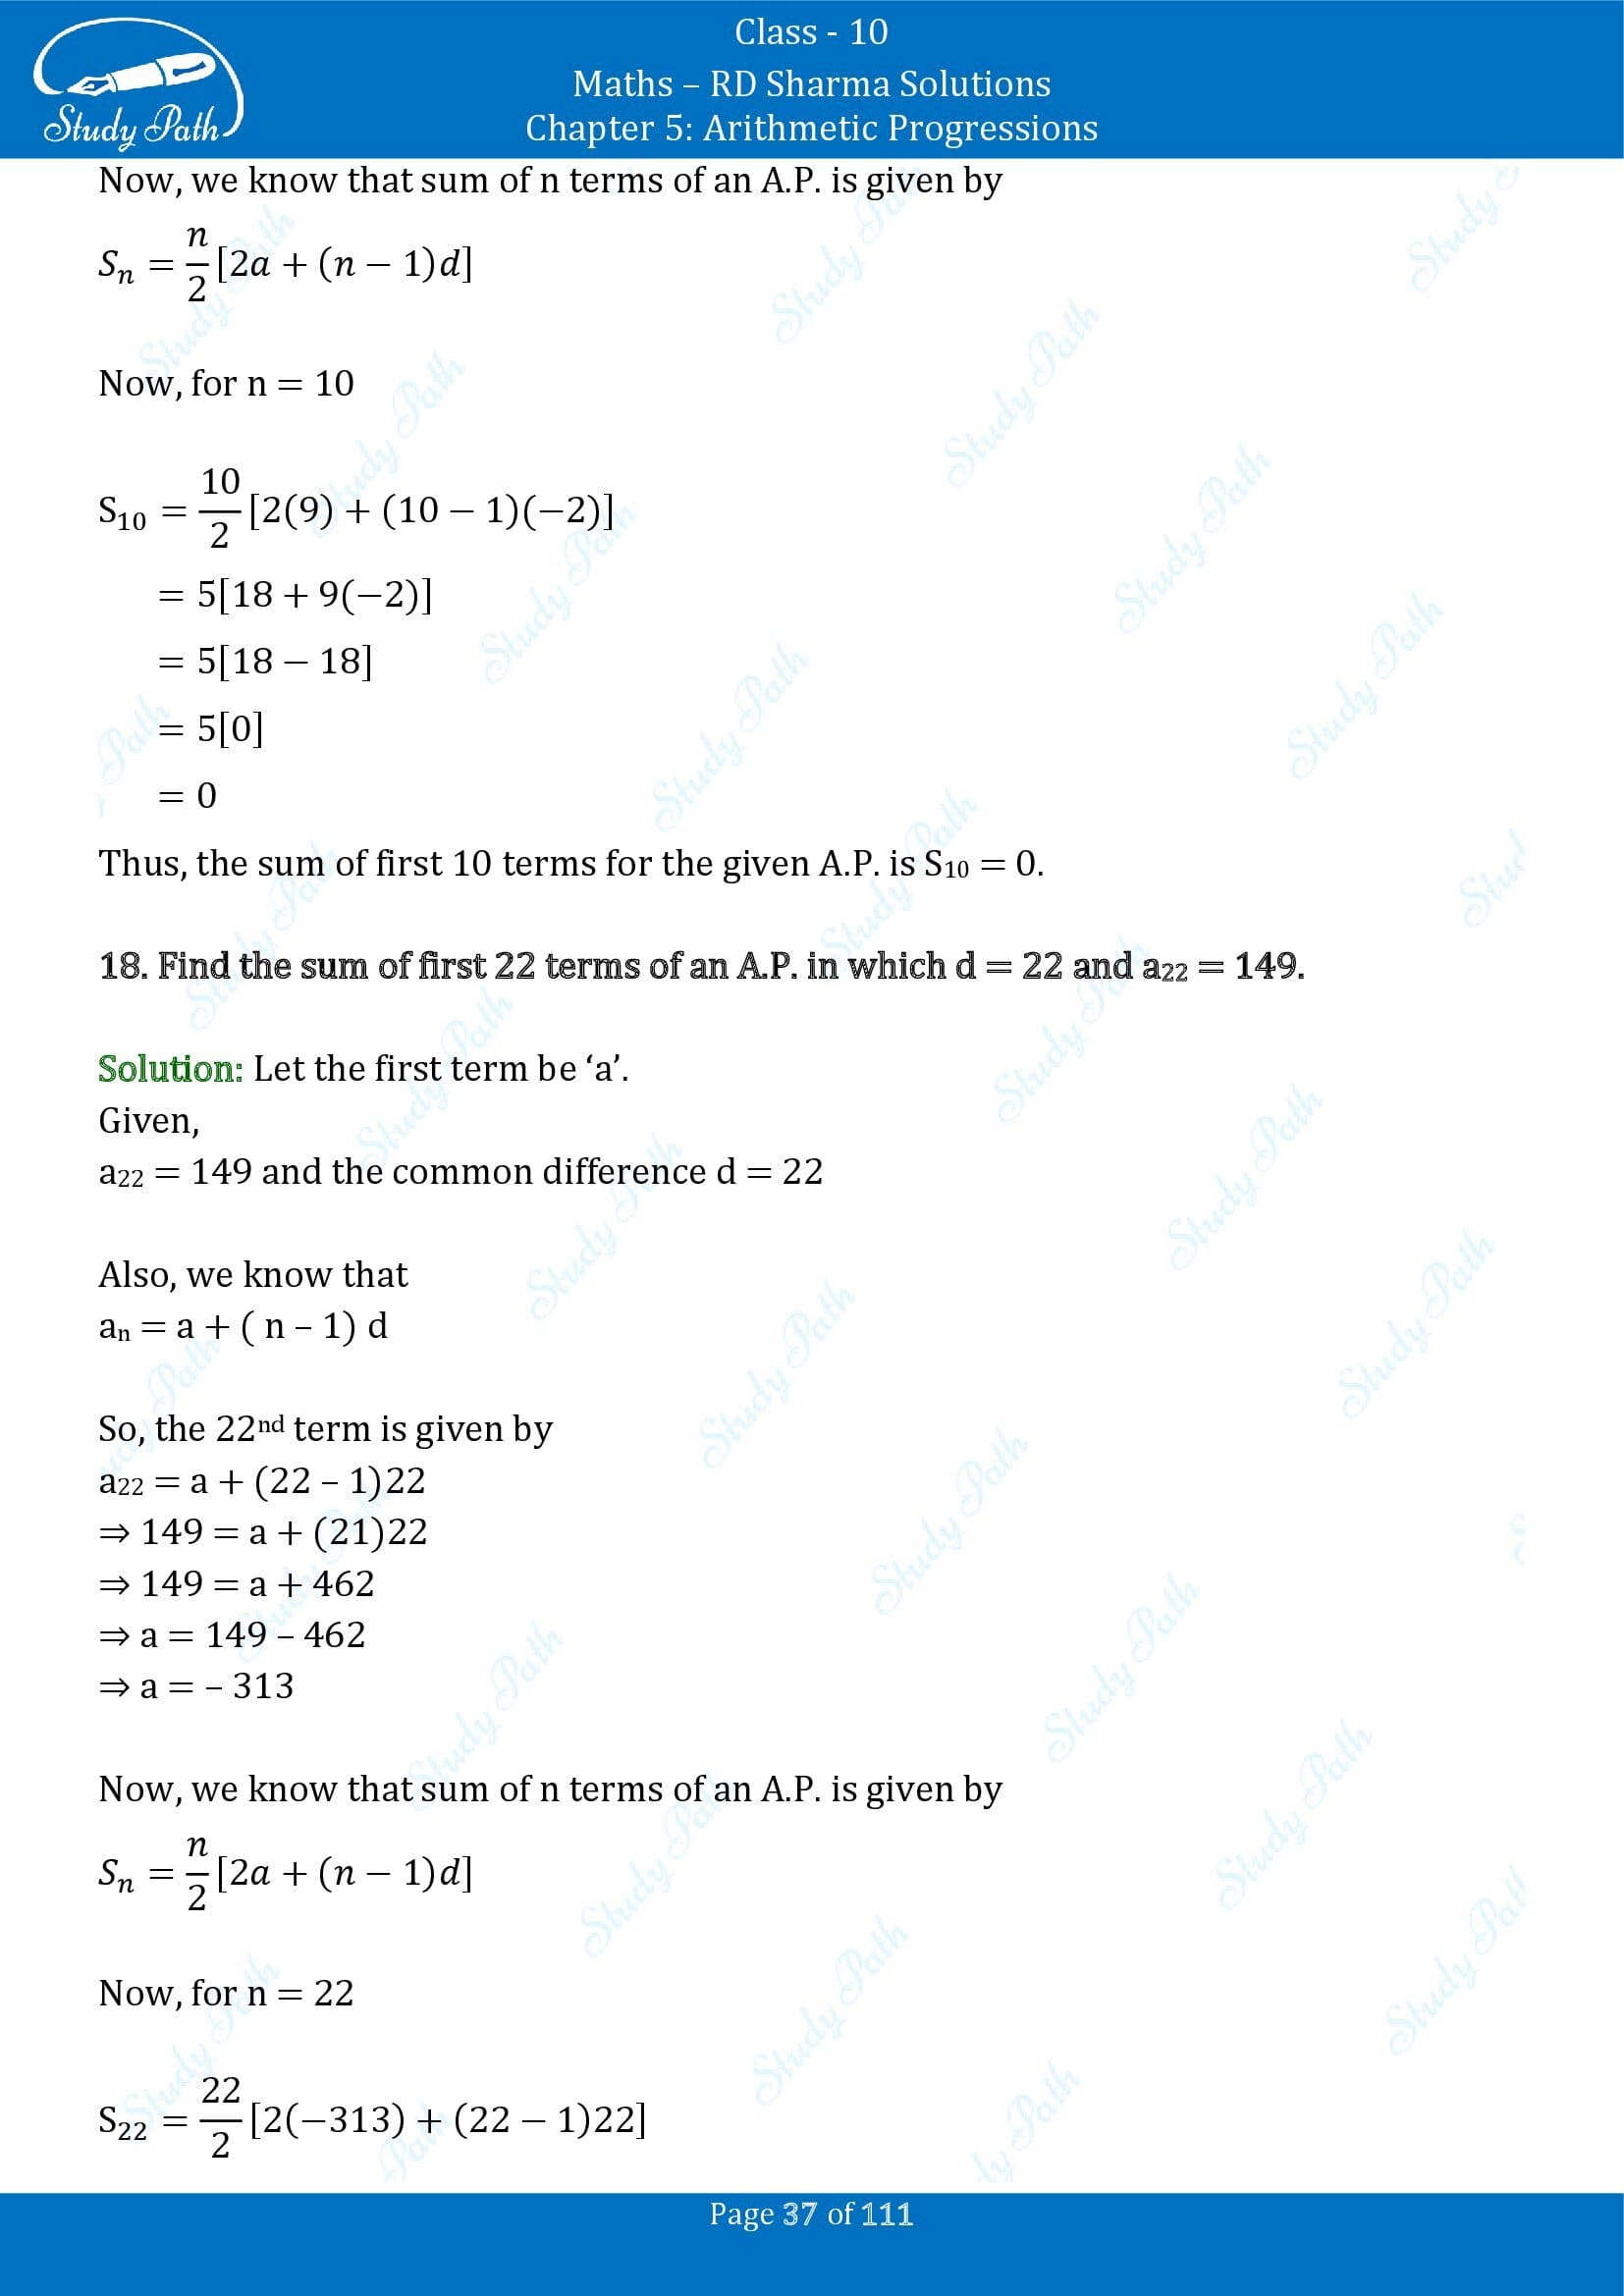 RD Sharma Solutions Class 10 Chapter 5 Arithmetic Progressions Exercise 5.6 00037